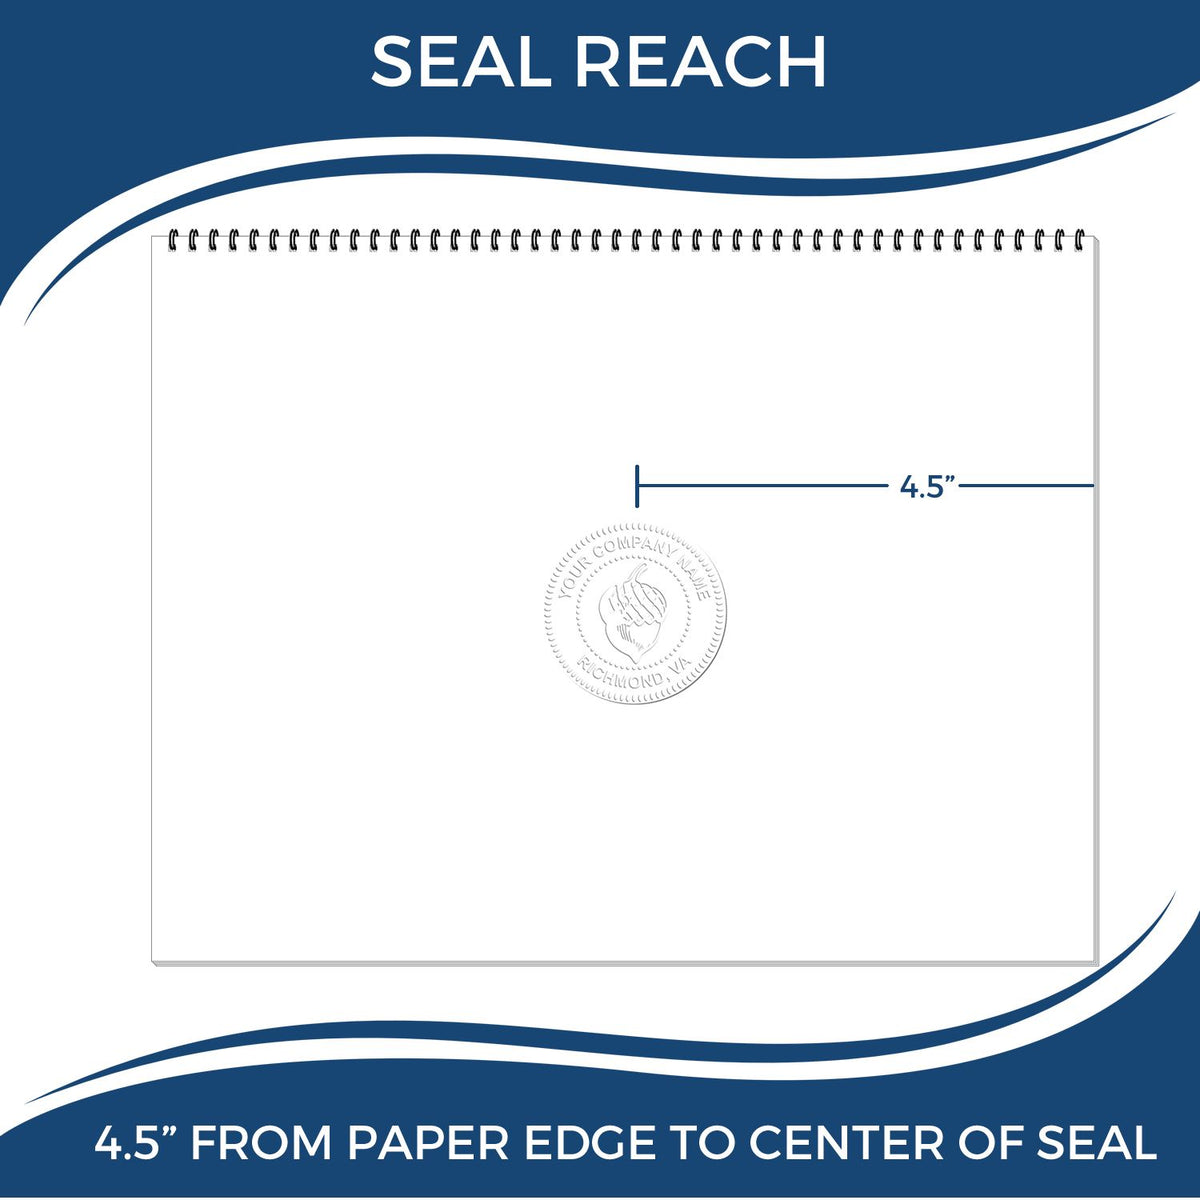 An infographic showing the seal reach which is represented by a ruler and a miniature seal image of the State of Arizona Extended Long Reach Geologist Seal